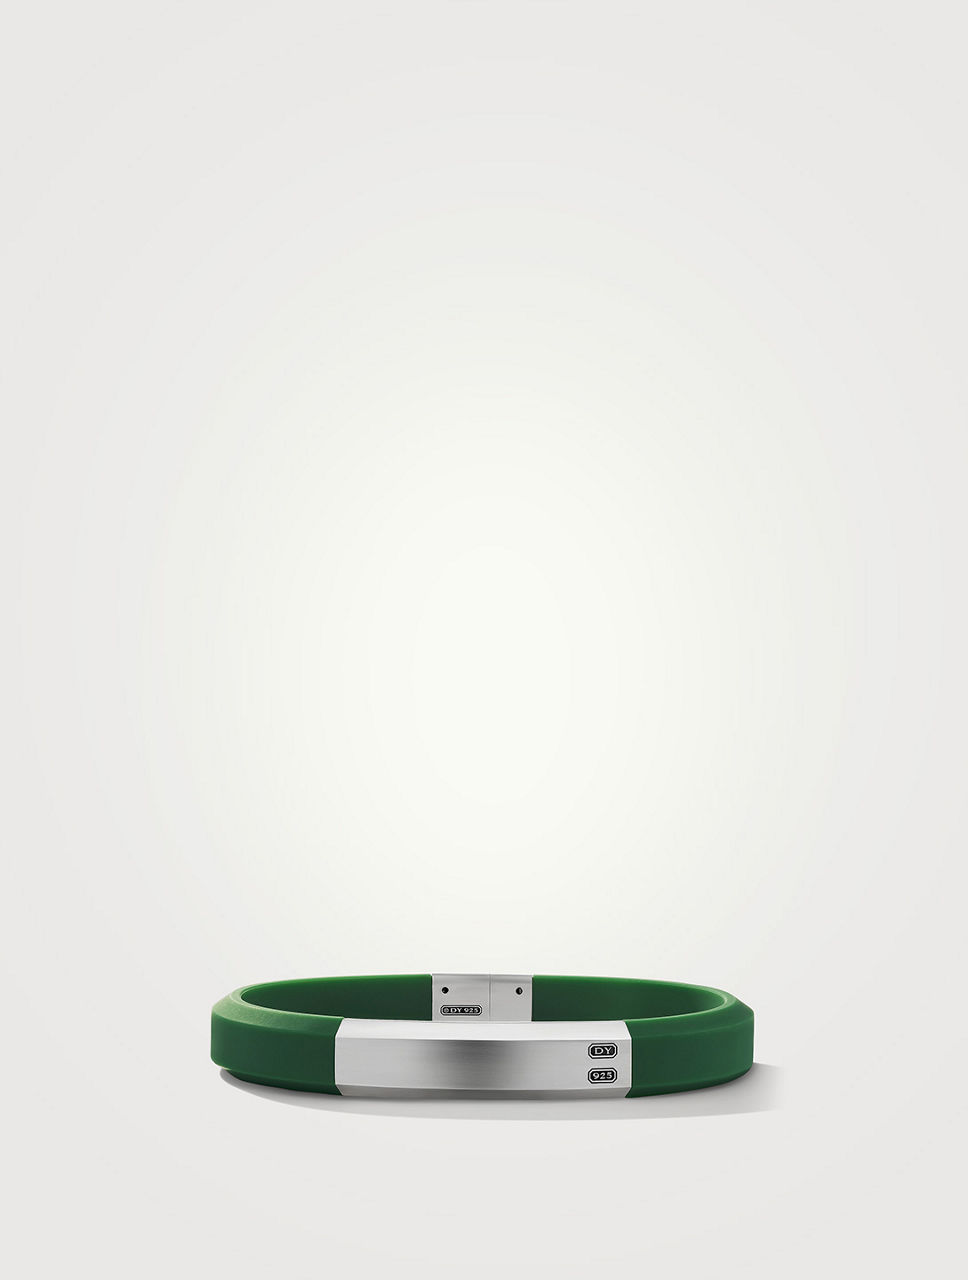 Streamline® Id Bracelet  With Green Rubber And Sterling Silver, 10mm